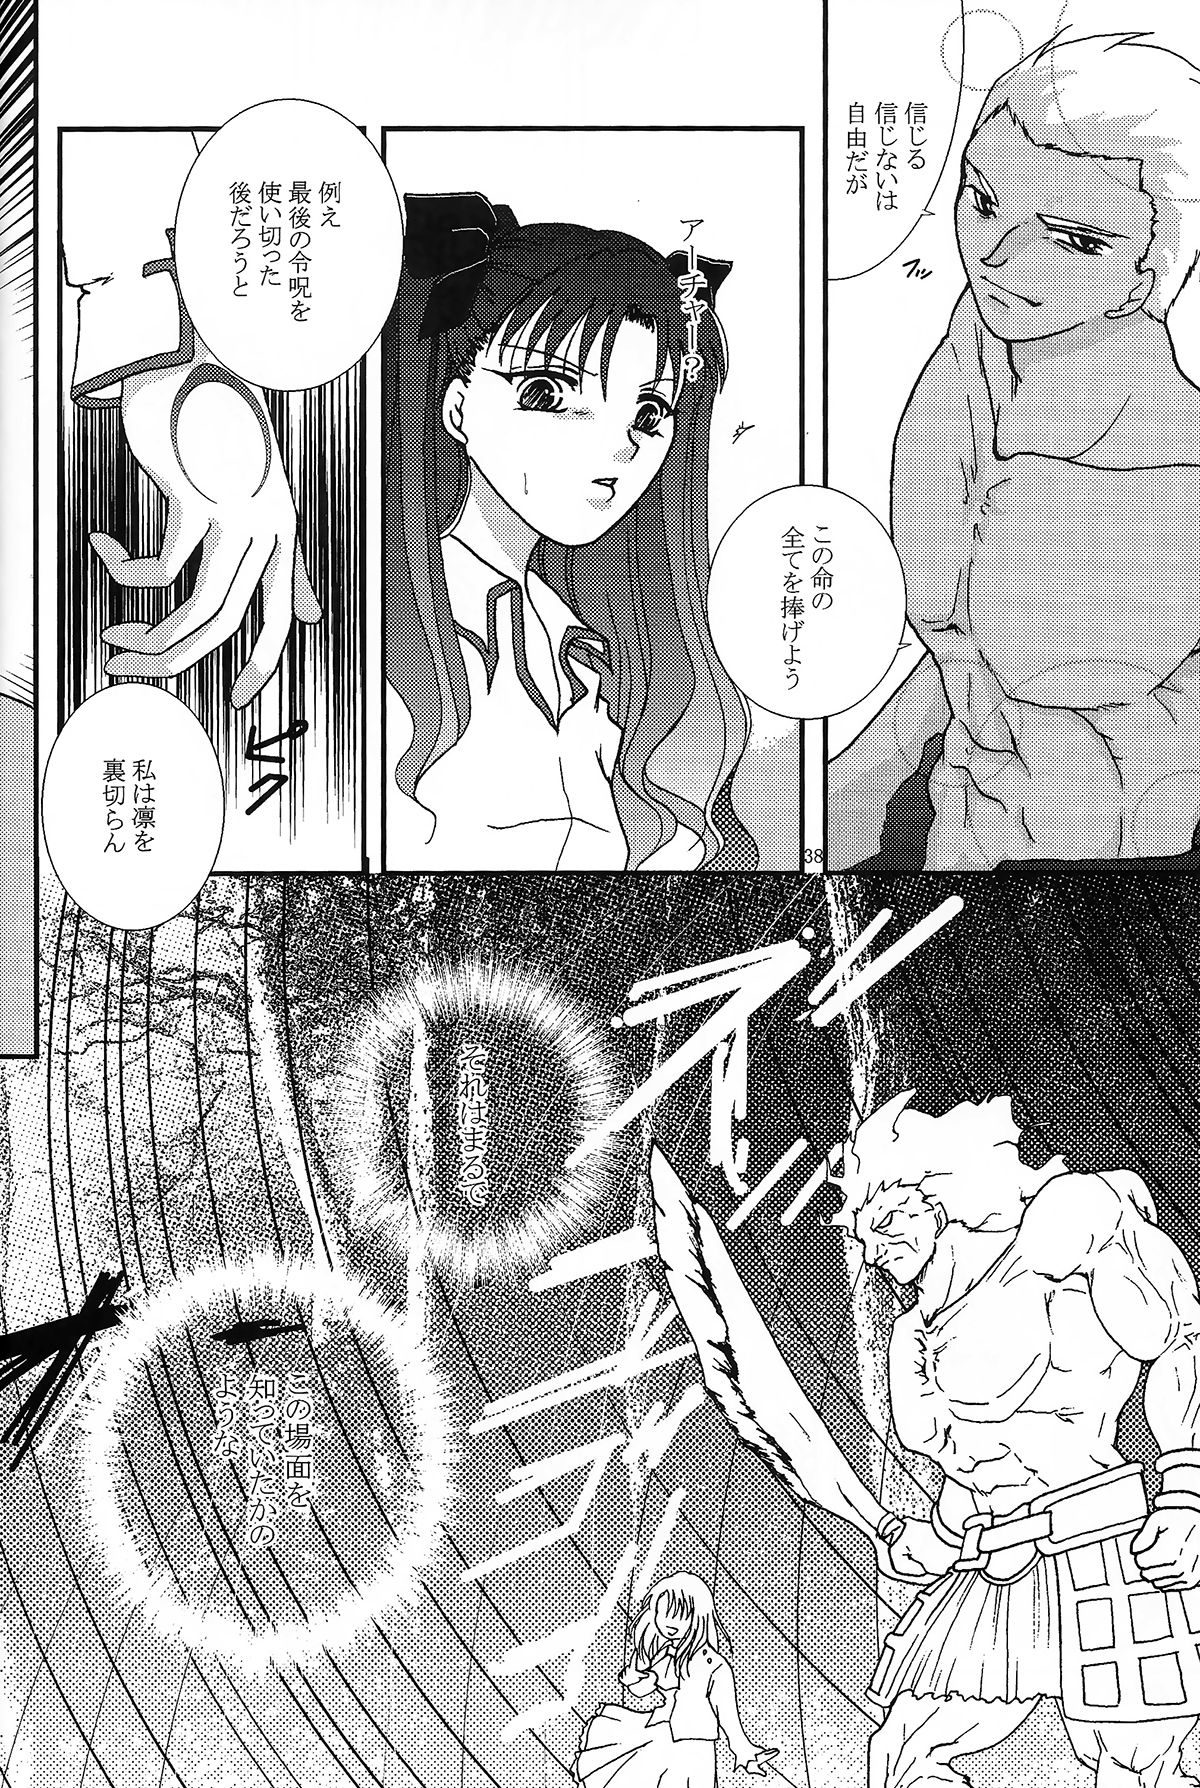 (SC24) [Takeda Syouten (Takeda Sora)] Question-7 (Fate/stay night) page 36 full